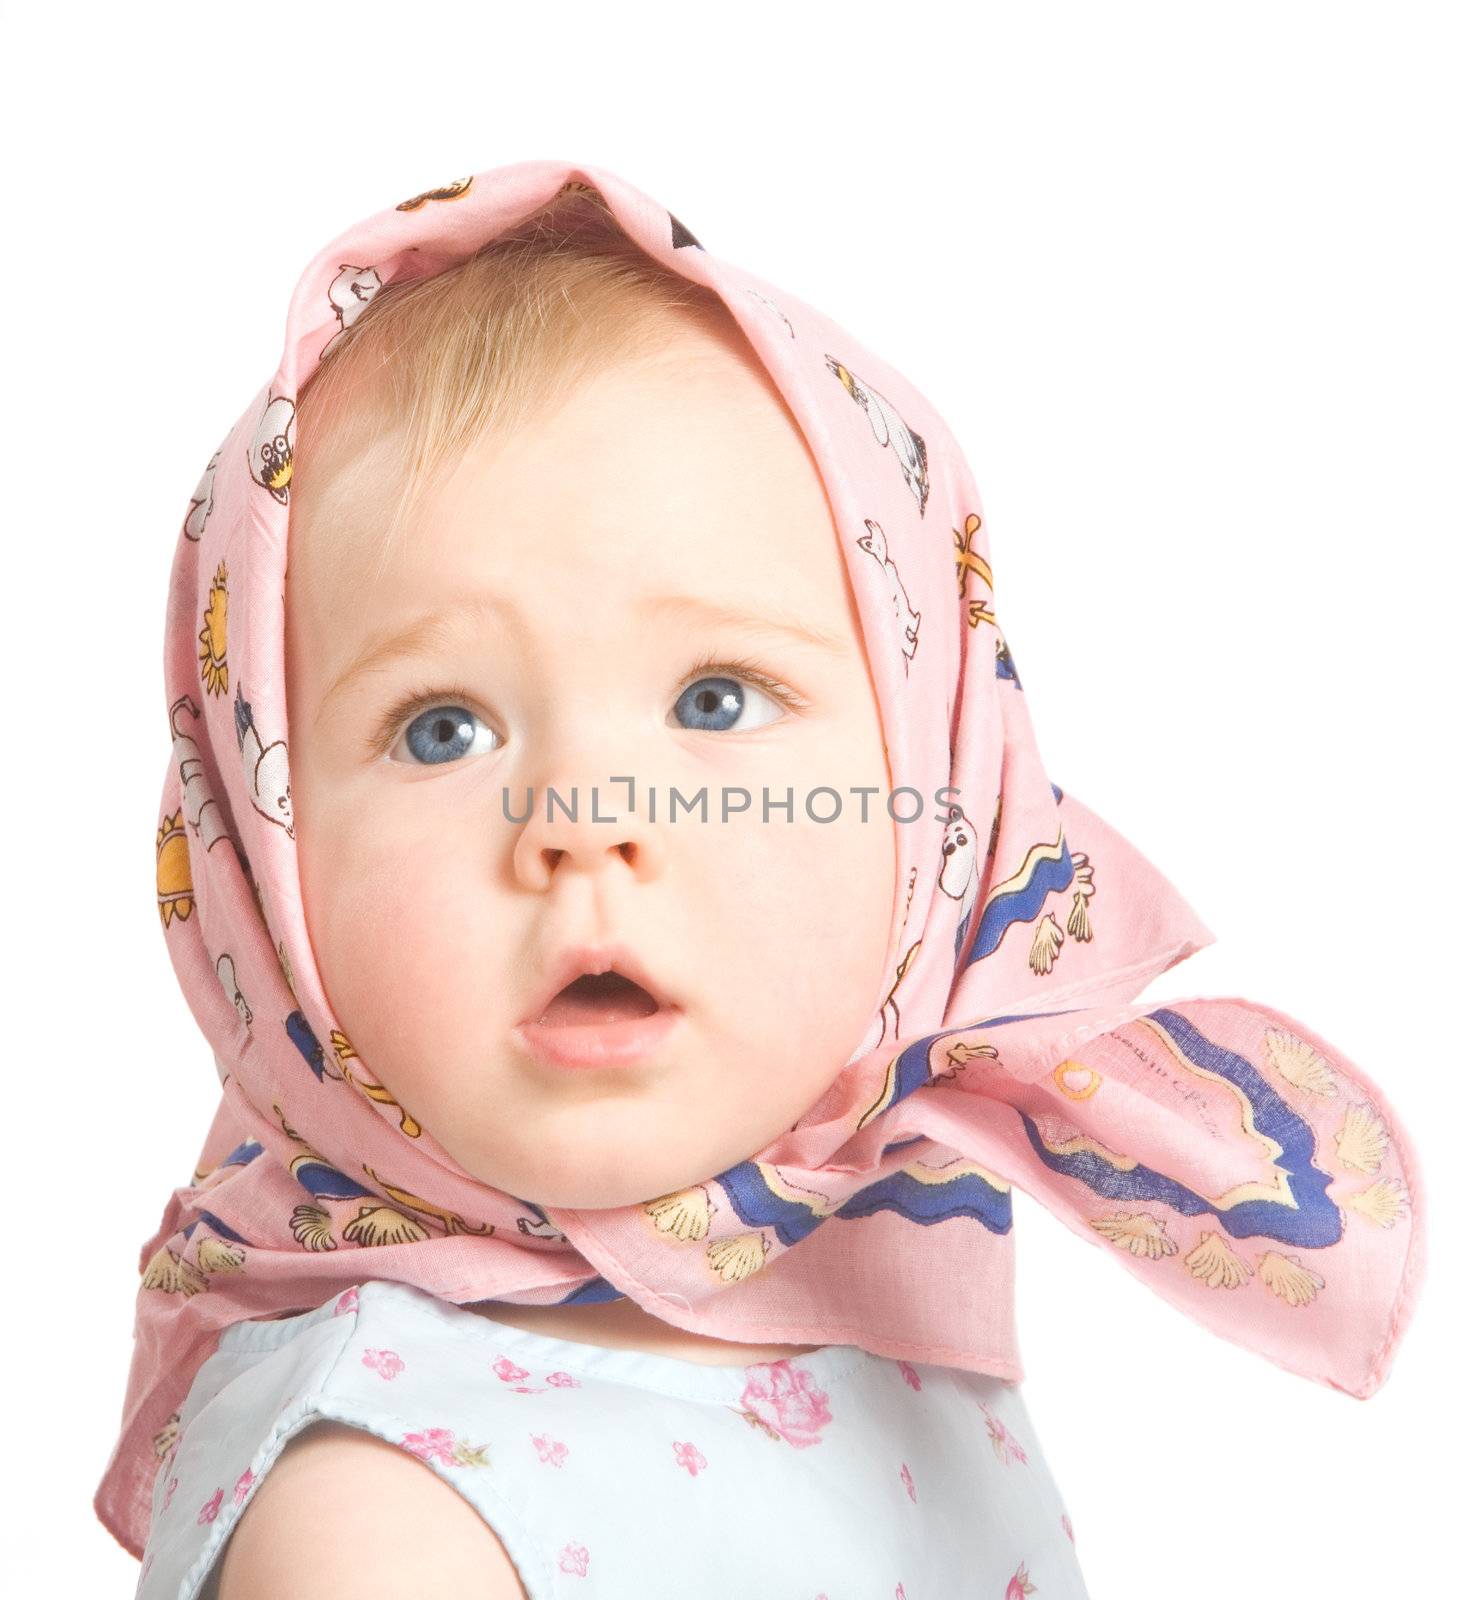 The one-year-old baby in a pink scarf on a white background
